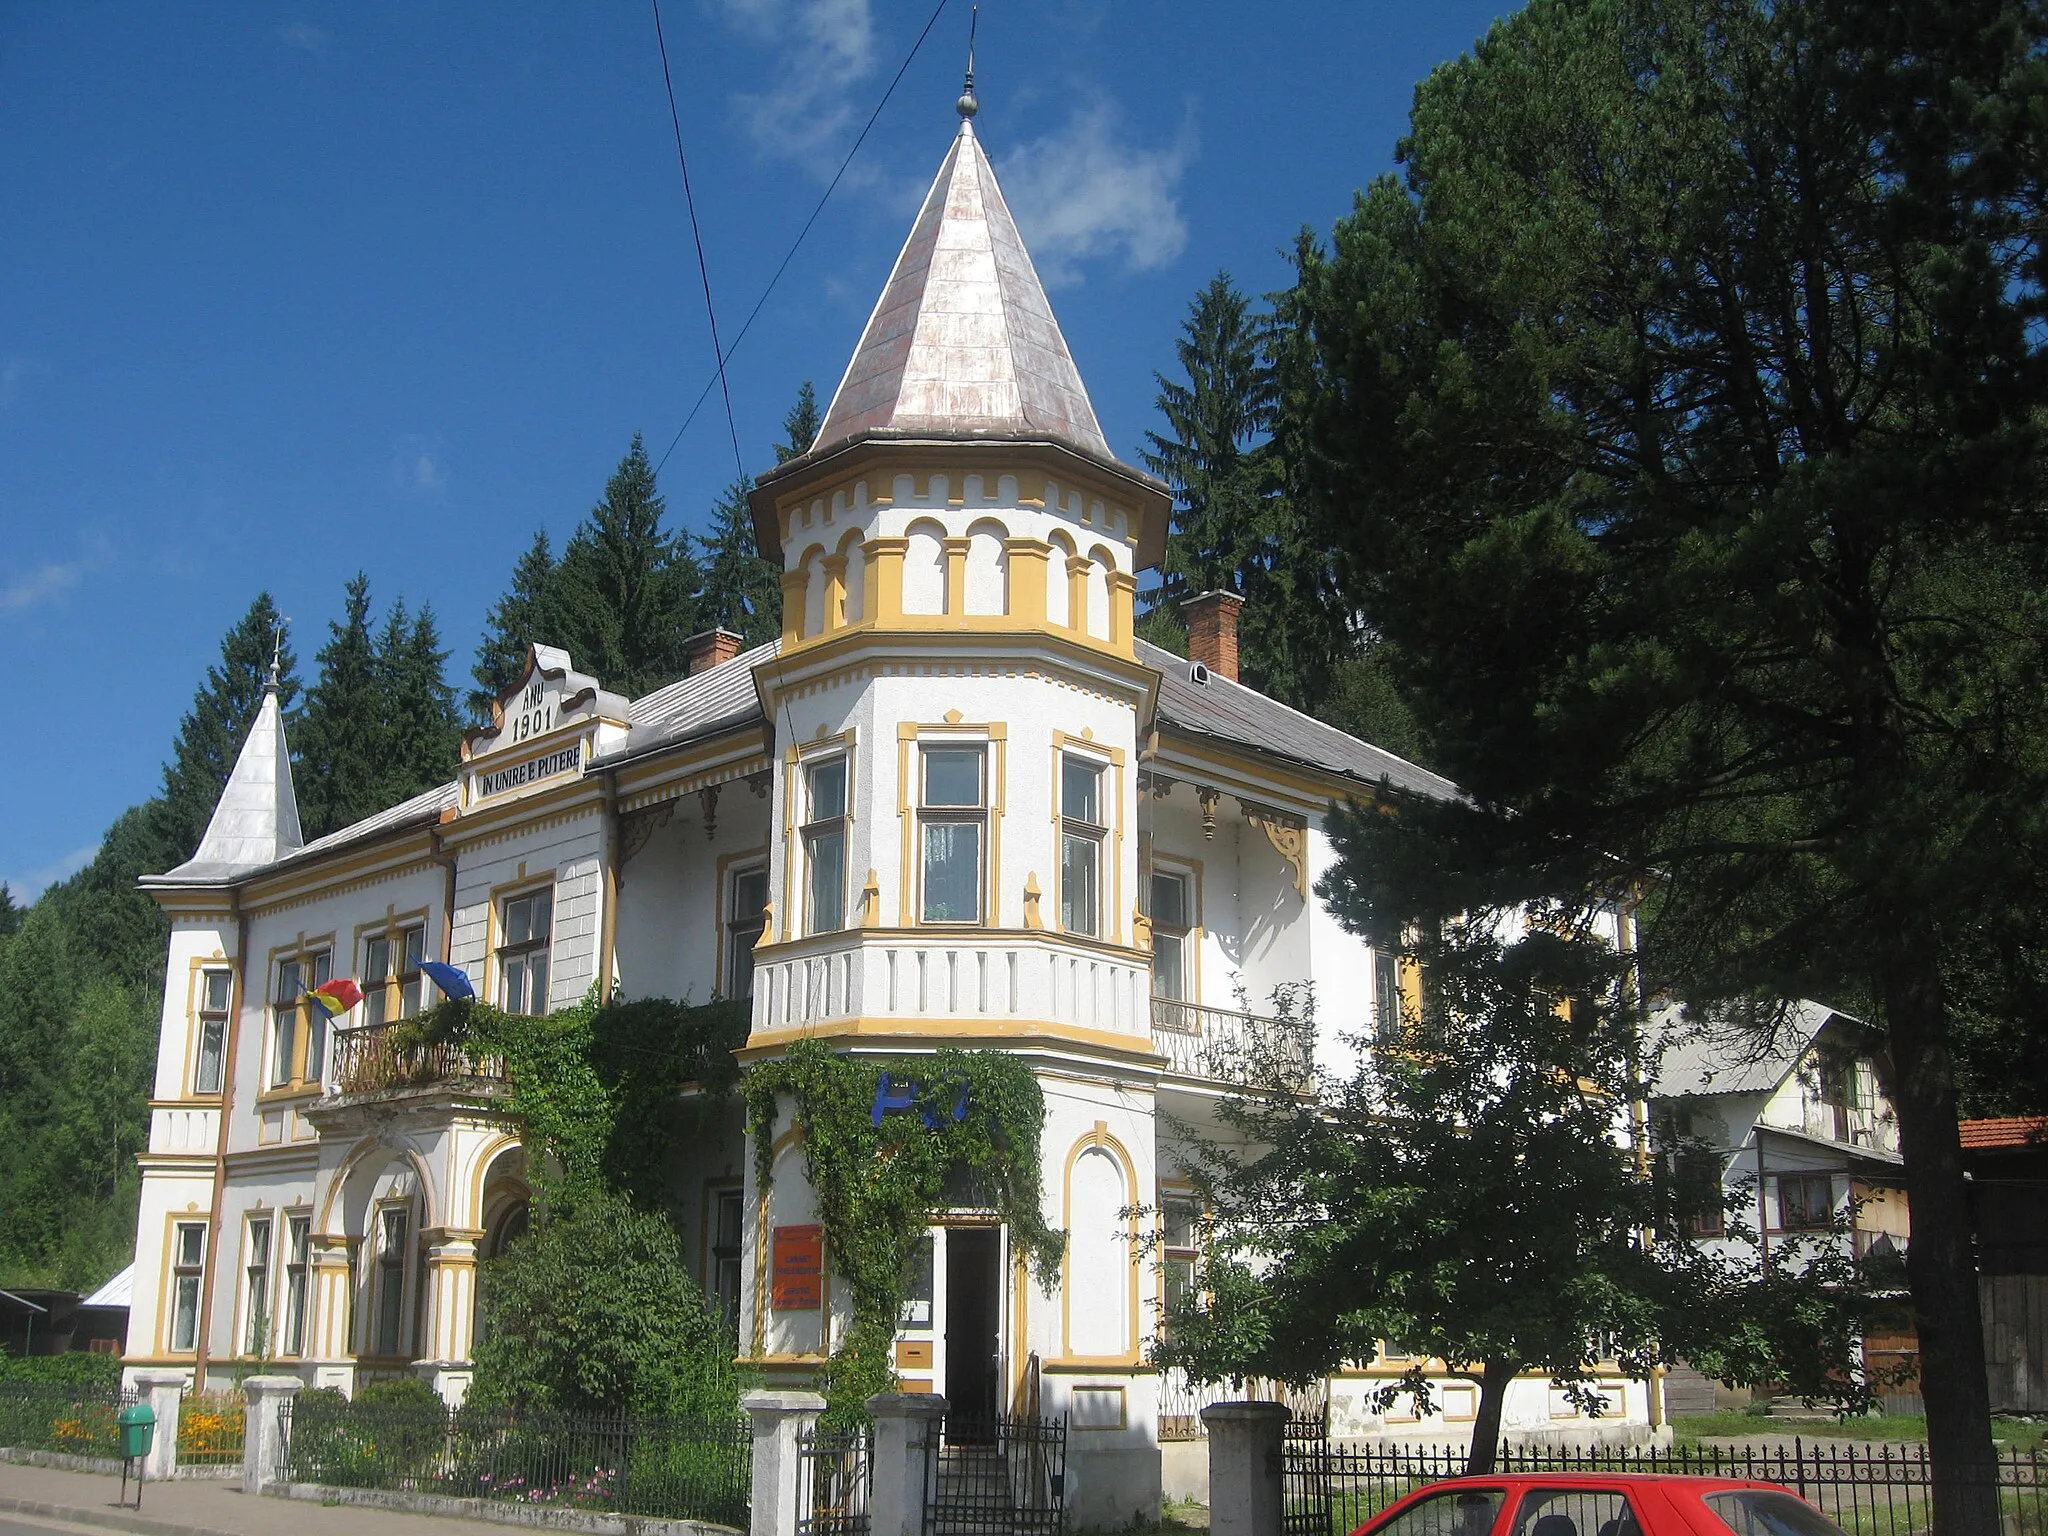 Photo showing: The City Library in Vatra Dornei, Romania,  built in 1901